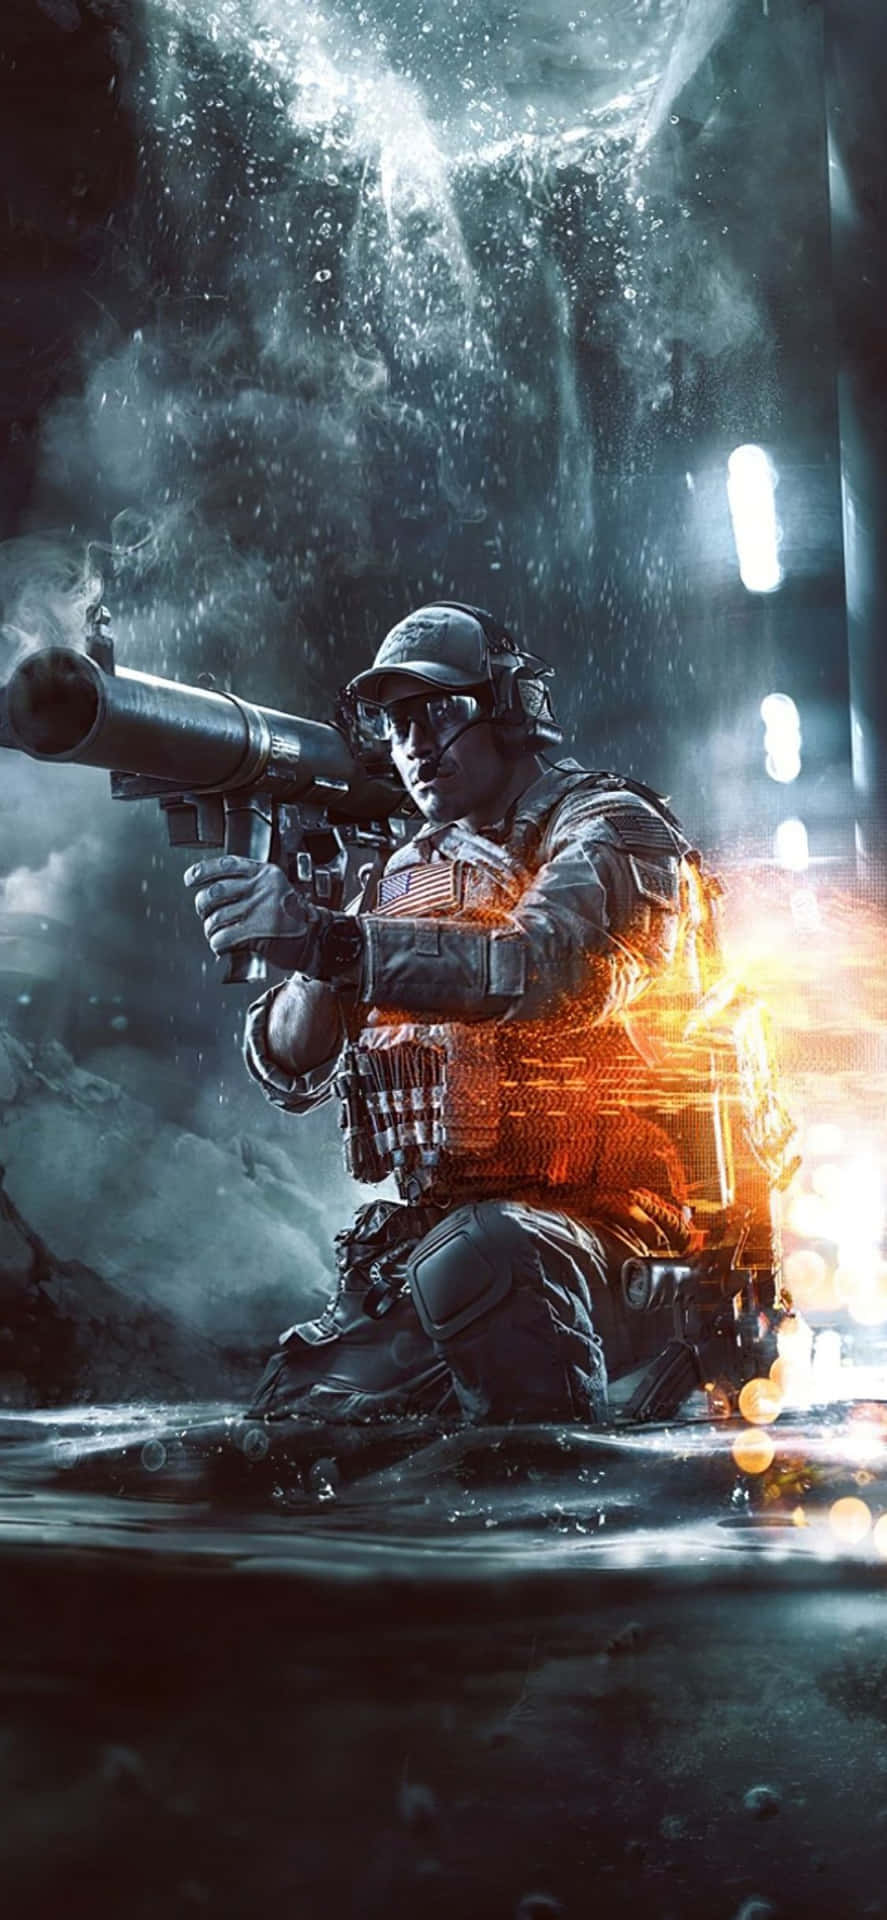 Iphone Xs Gaming Background Battlefield 4